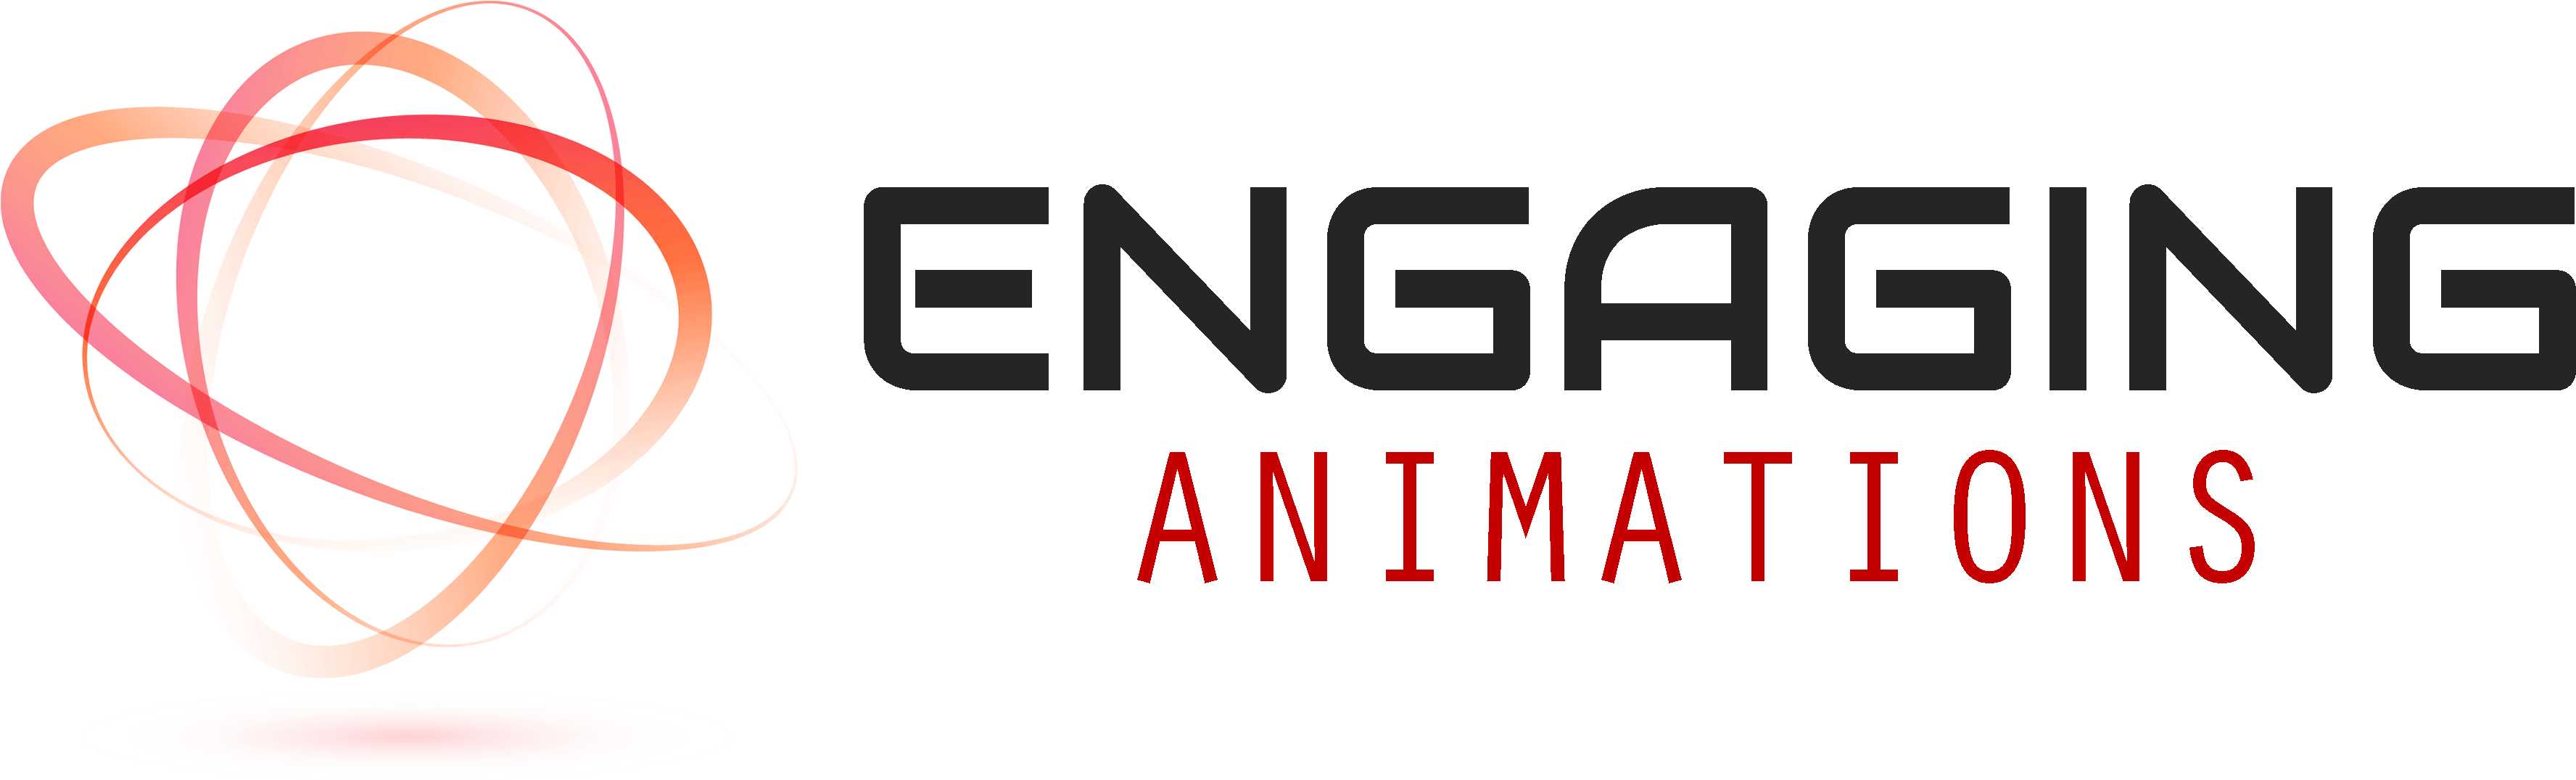 Engaging Animations Logo PNG